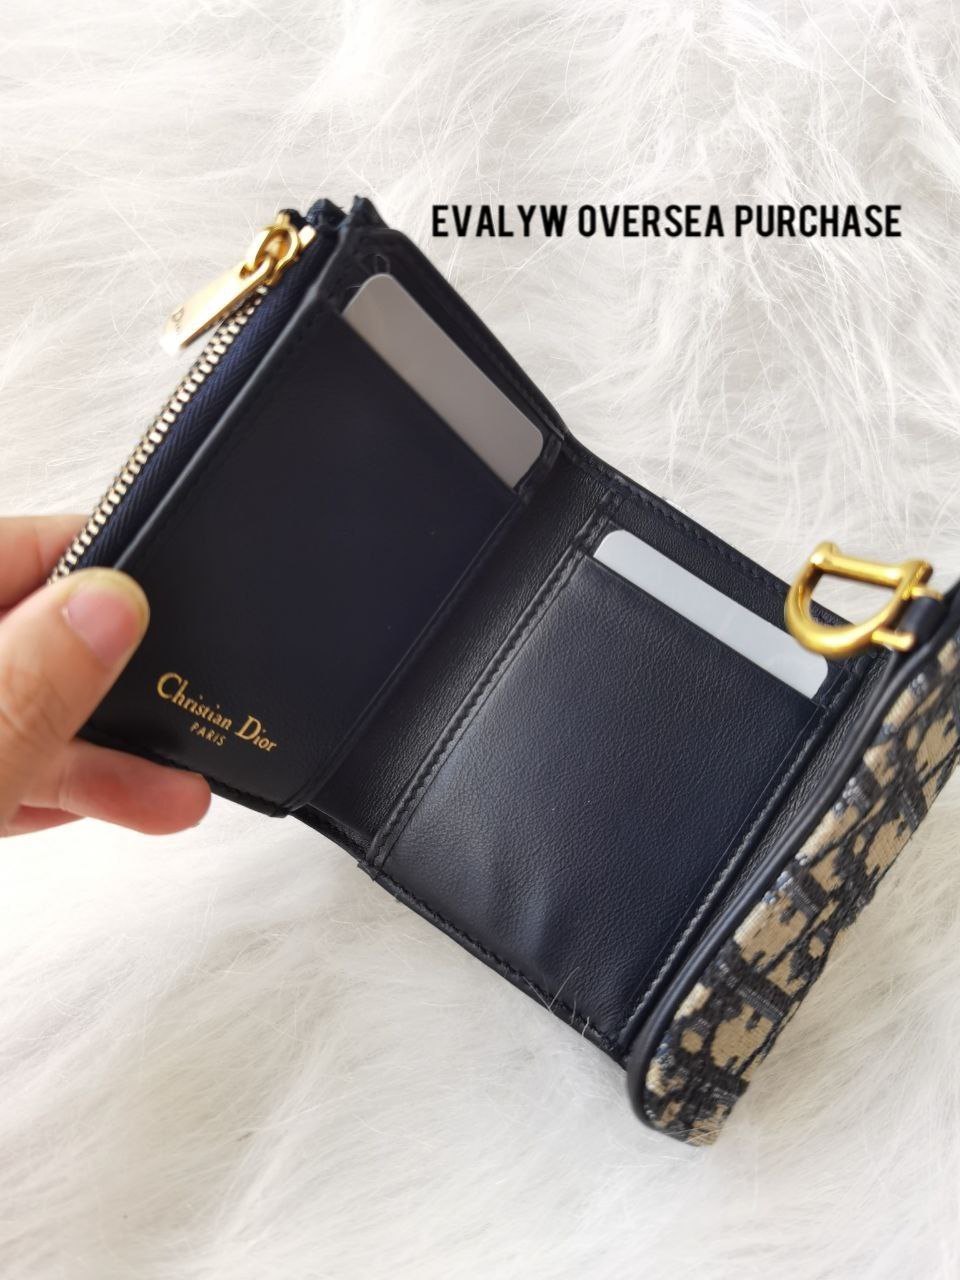 Saddle Lotus Wallet - Evalyw Oversea Purchase